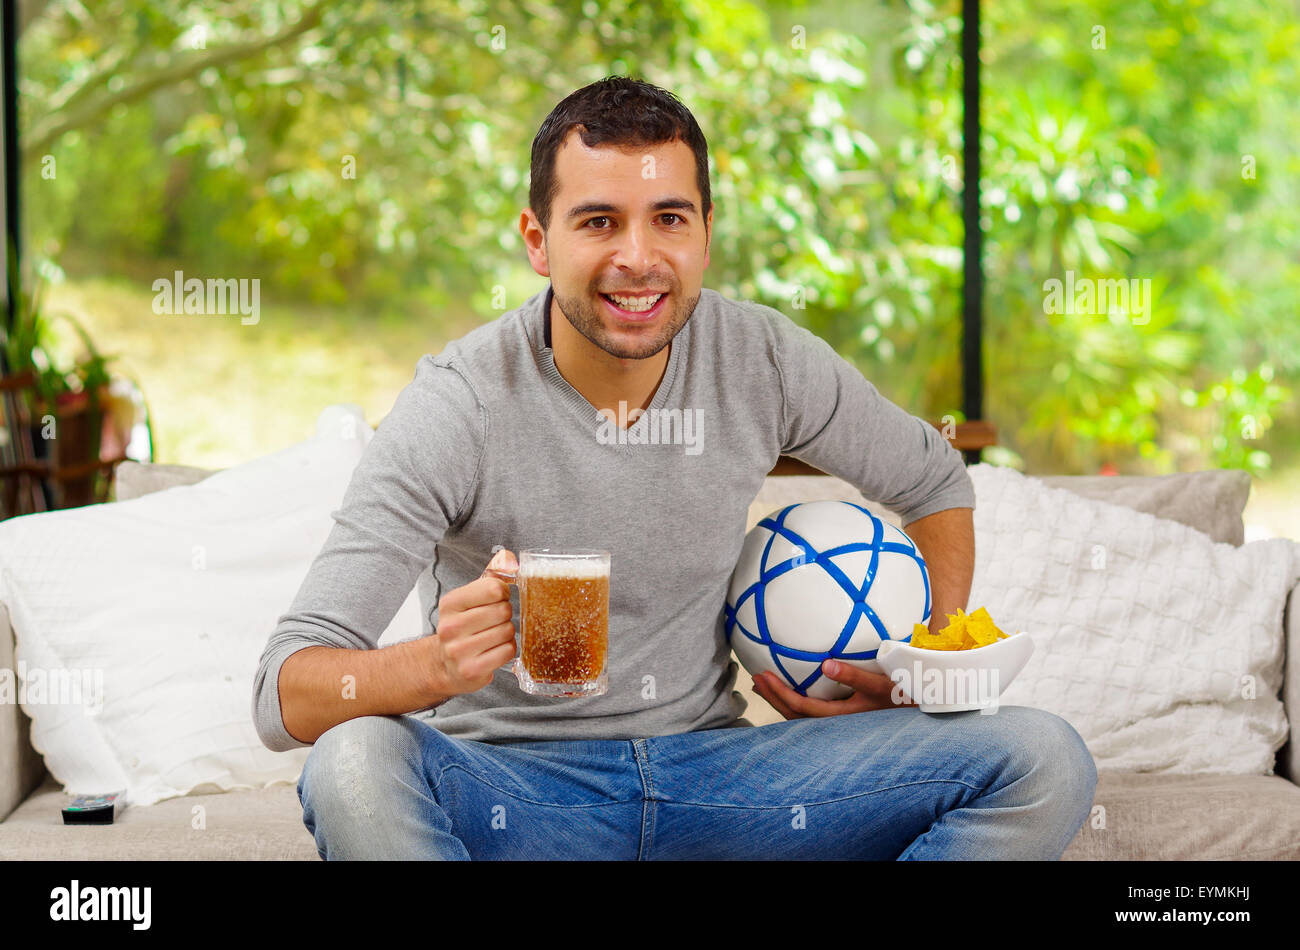 Hispanic man wearing denim jeans with grey sweater sitting in sofa enthusiastically watching tv holding beer and football Stock Photo